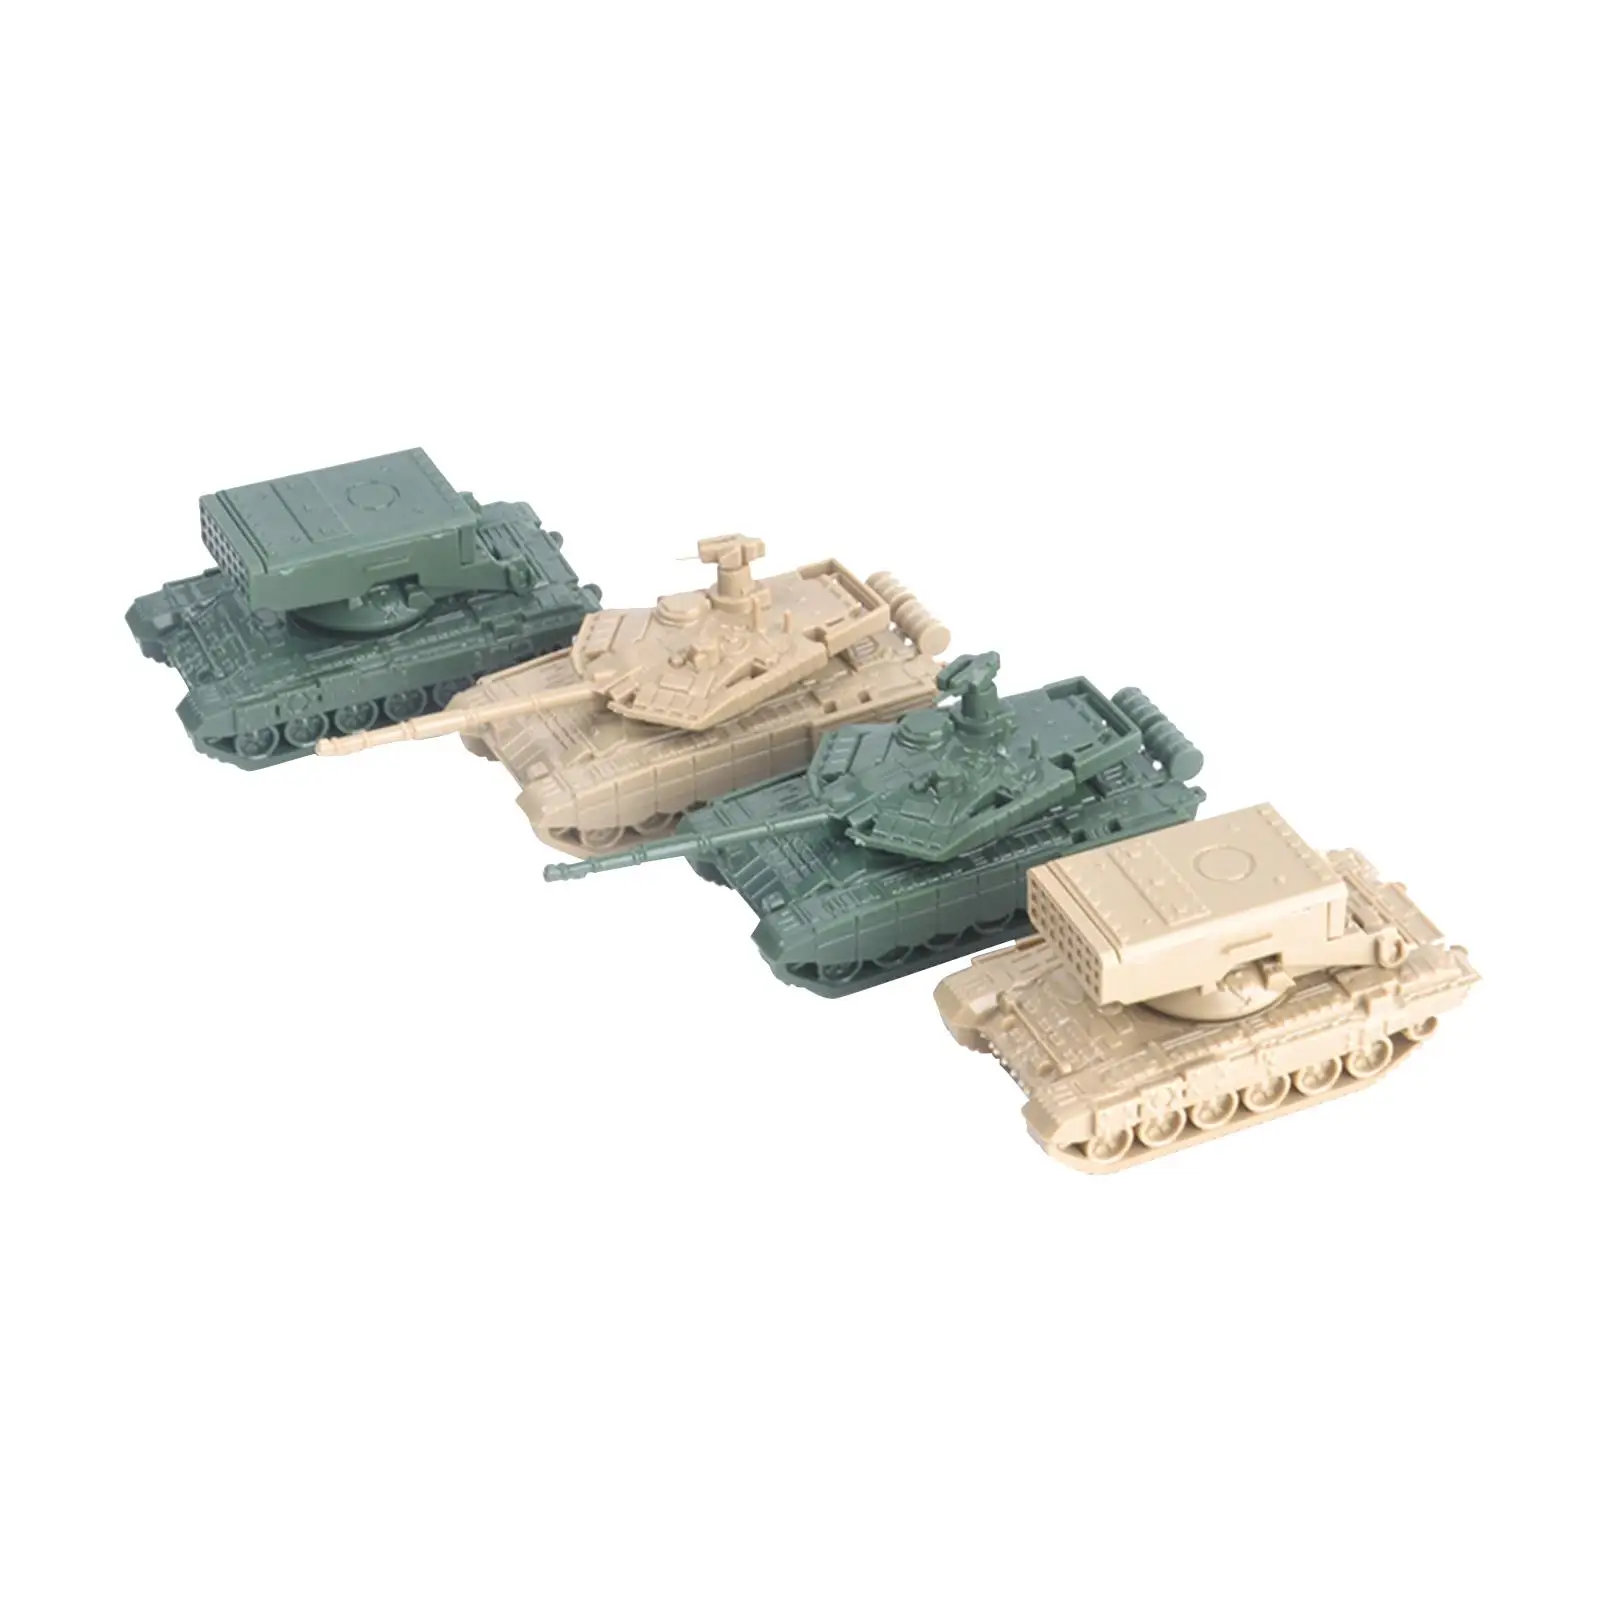 4 Pieces 1/144 Tank Model Education Toy Armored Vehicle Collectables Tabletop Decor for Toddlers Girls Kids Holiday Gifts